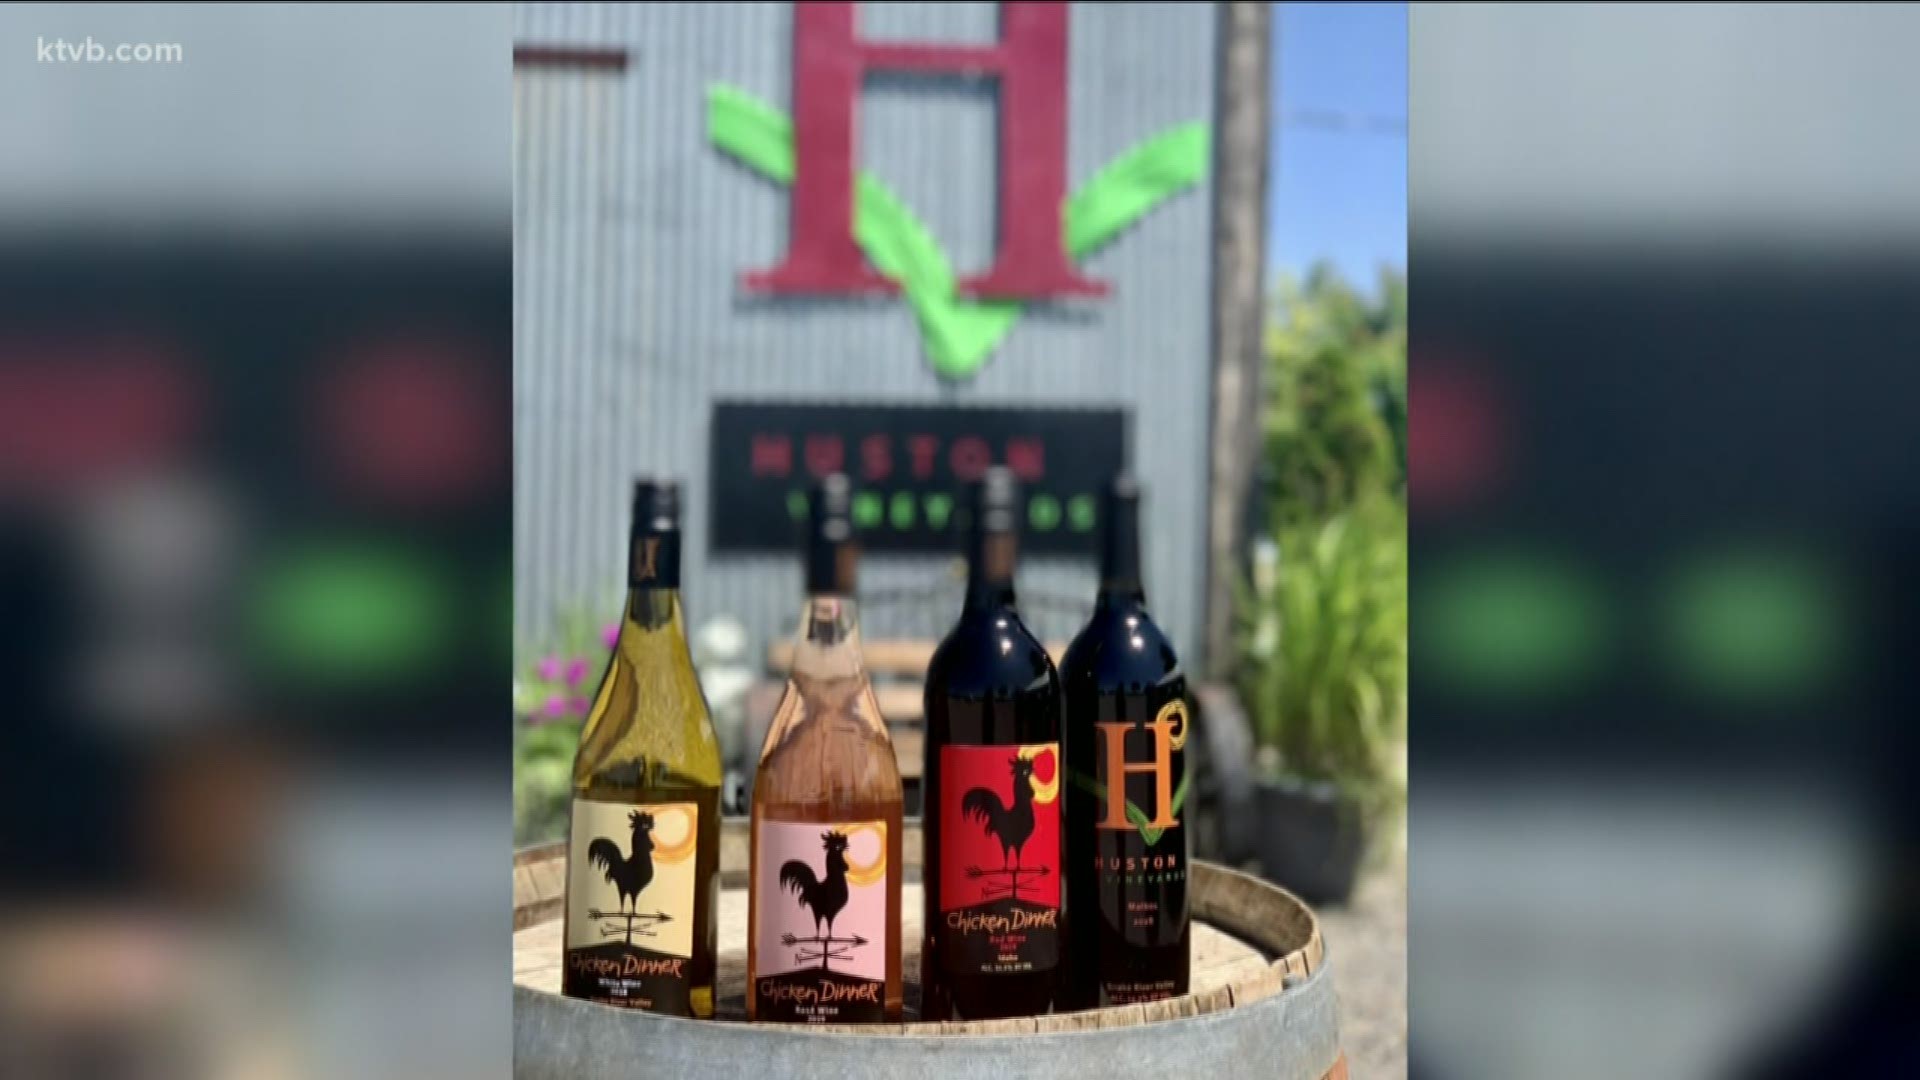 Huston Vineyards took home multiple gold medal awards for their "Chicken Dinner" white, red, rose & malbec wines at the 2020 Sunset International Wine Competition.